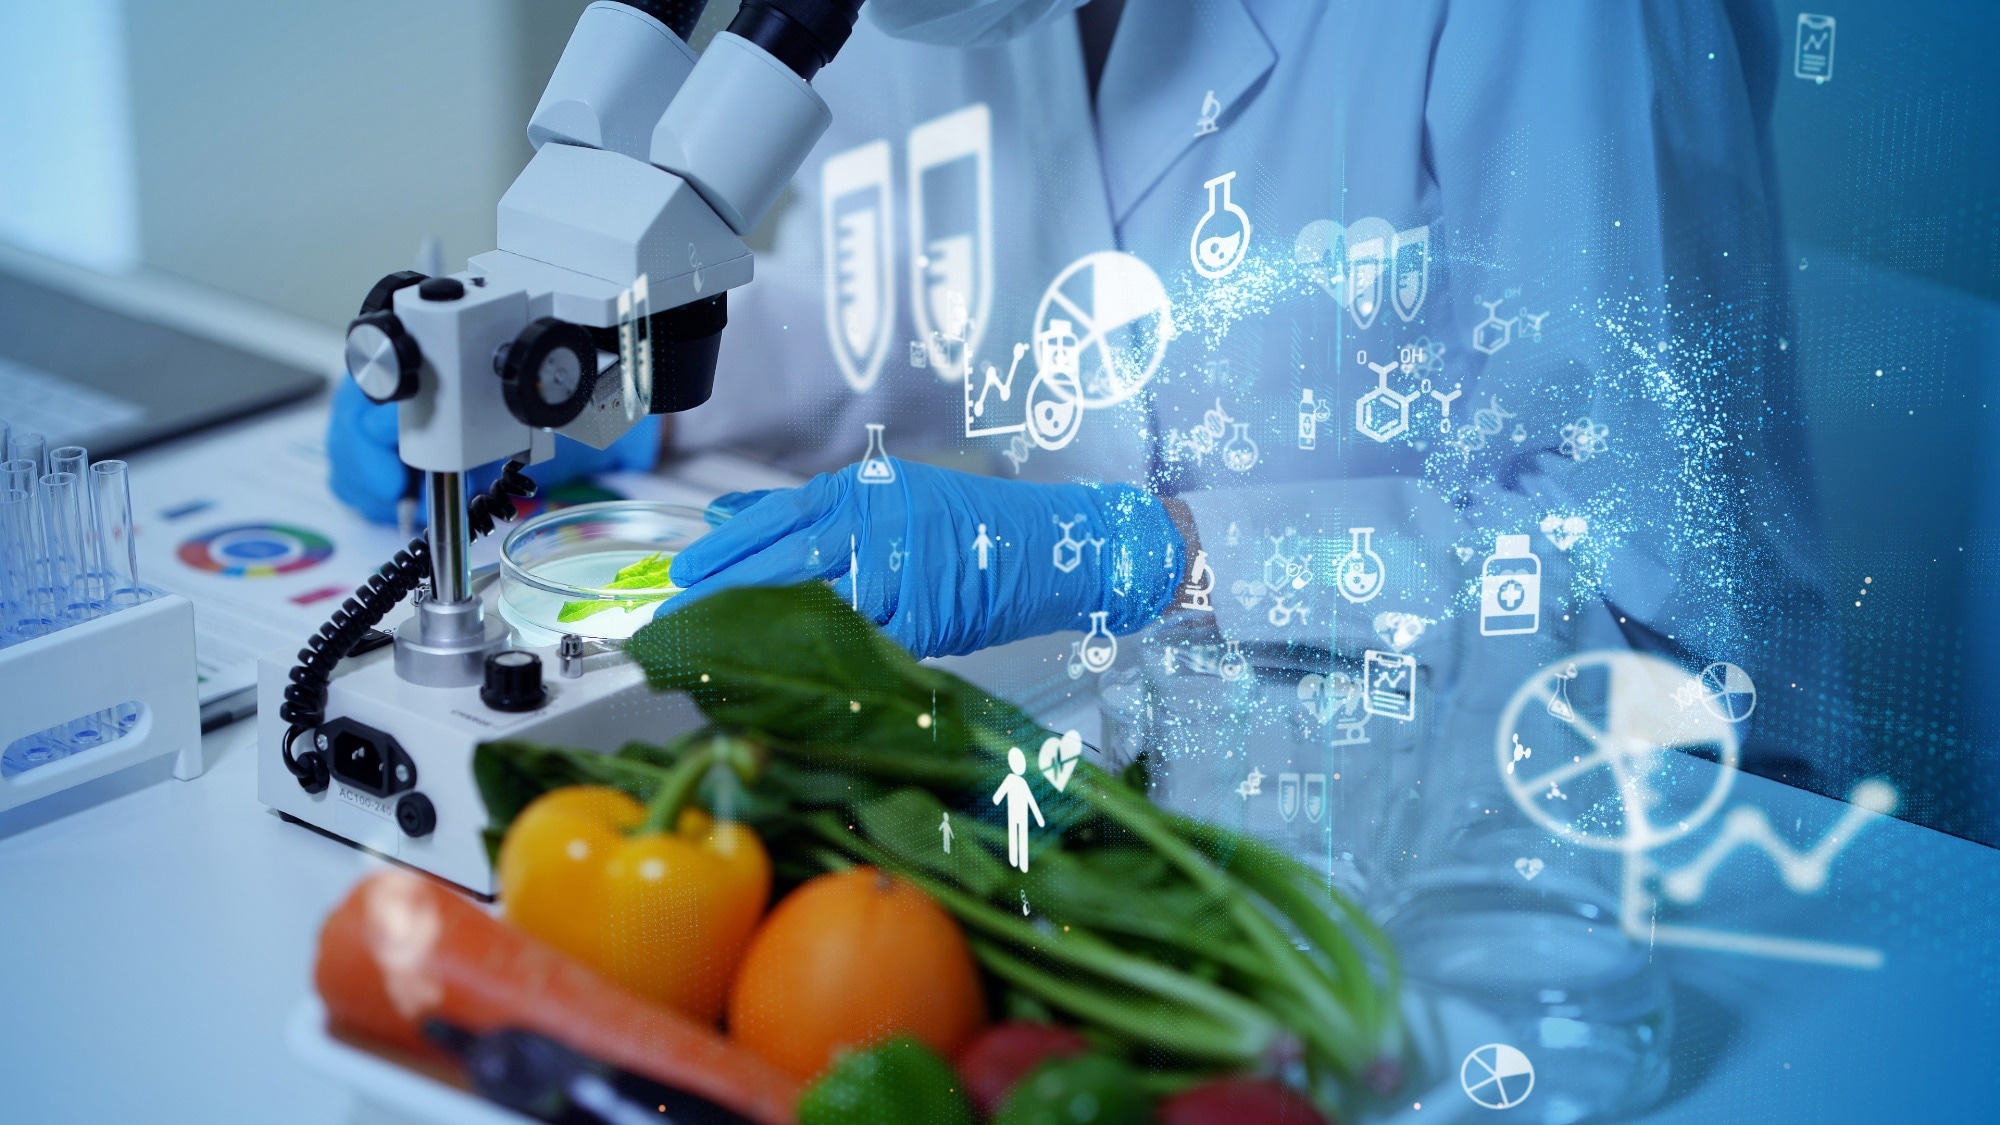 Study: Artificial Intelligence Applications to Public Health Nutrition. Image Credit: metamorworks/Shutterstock.com